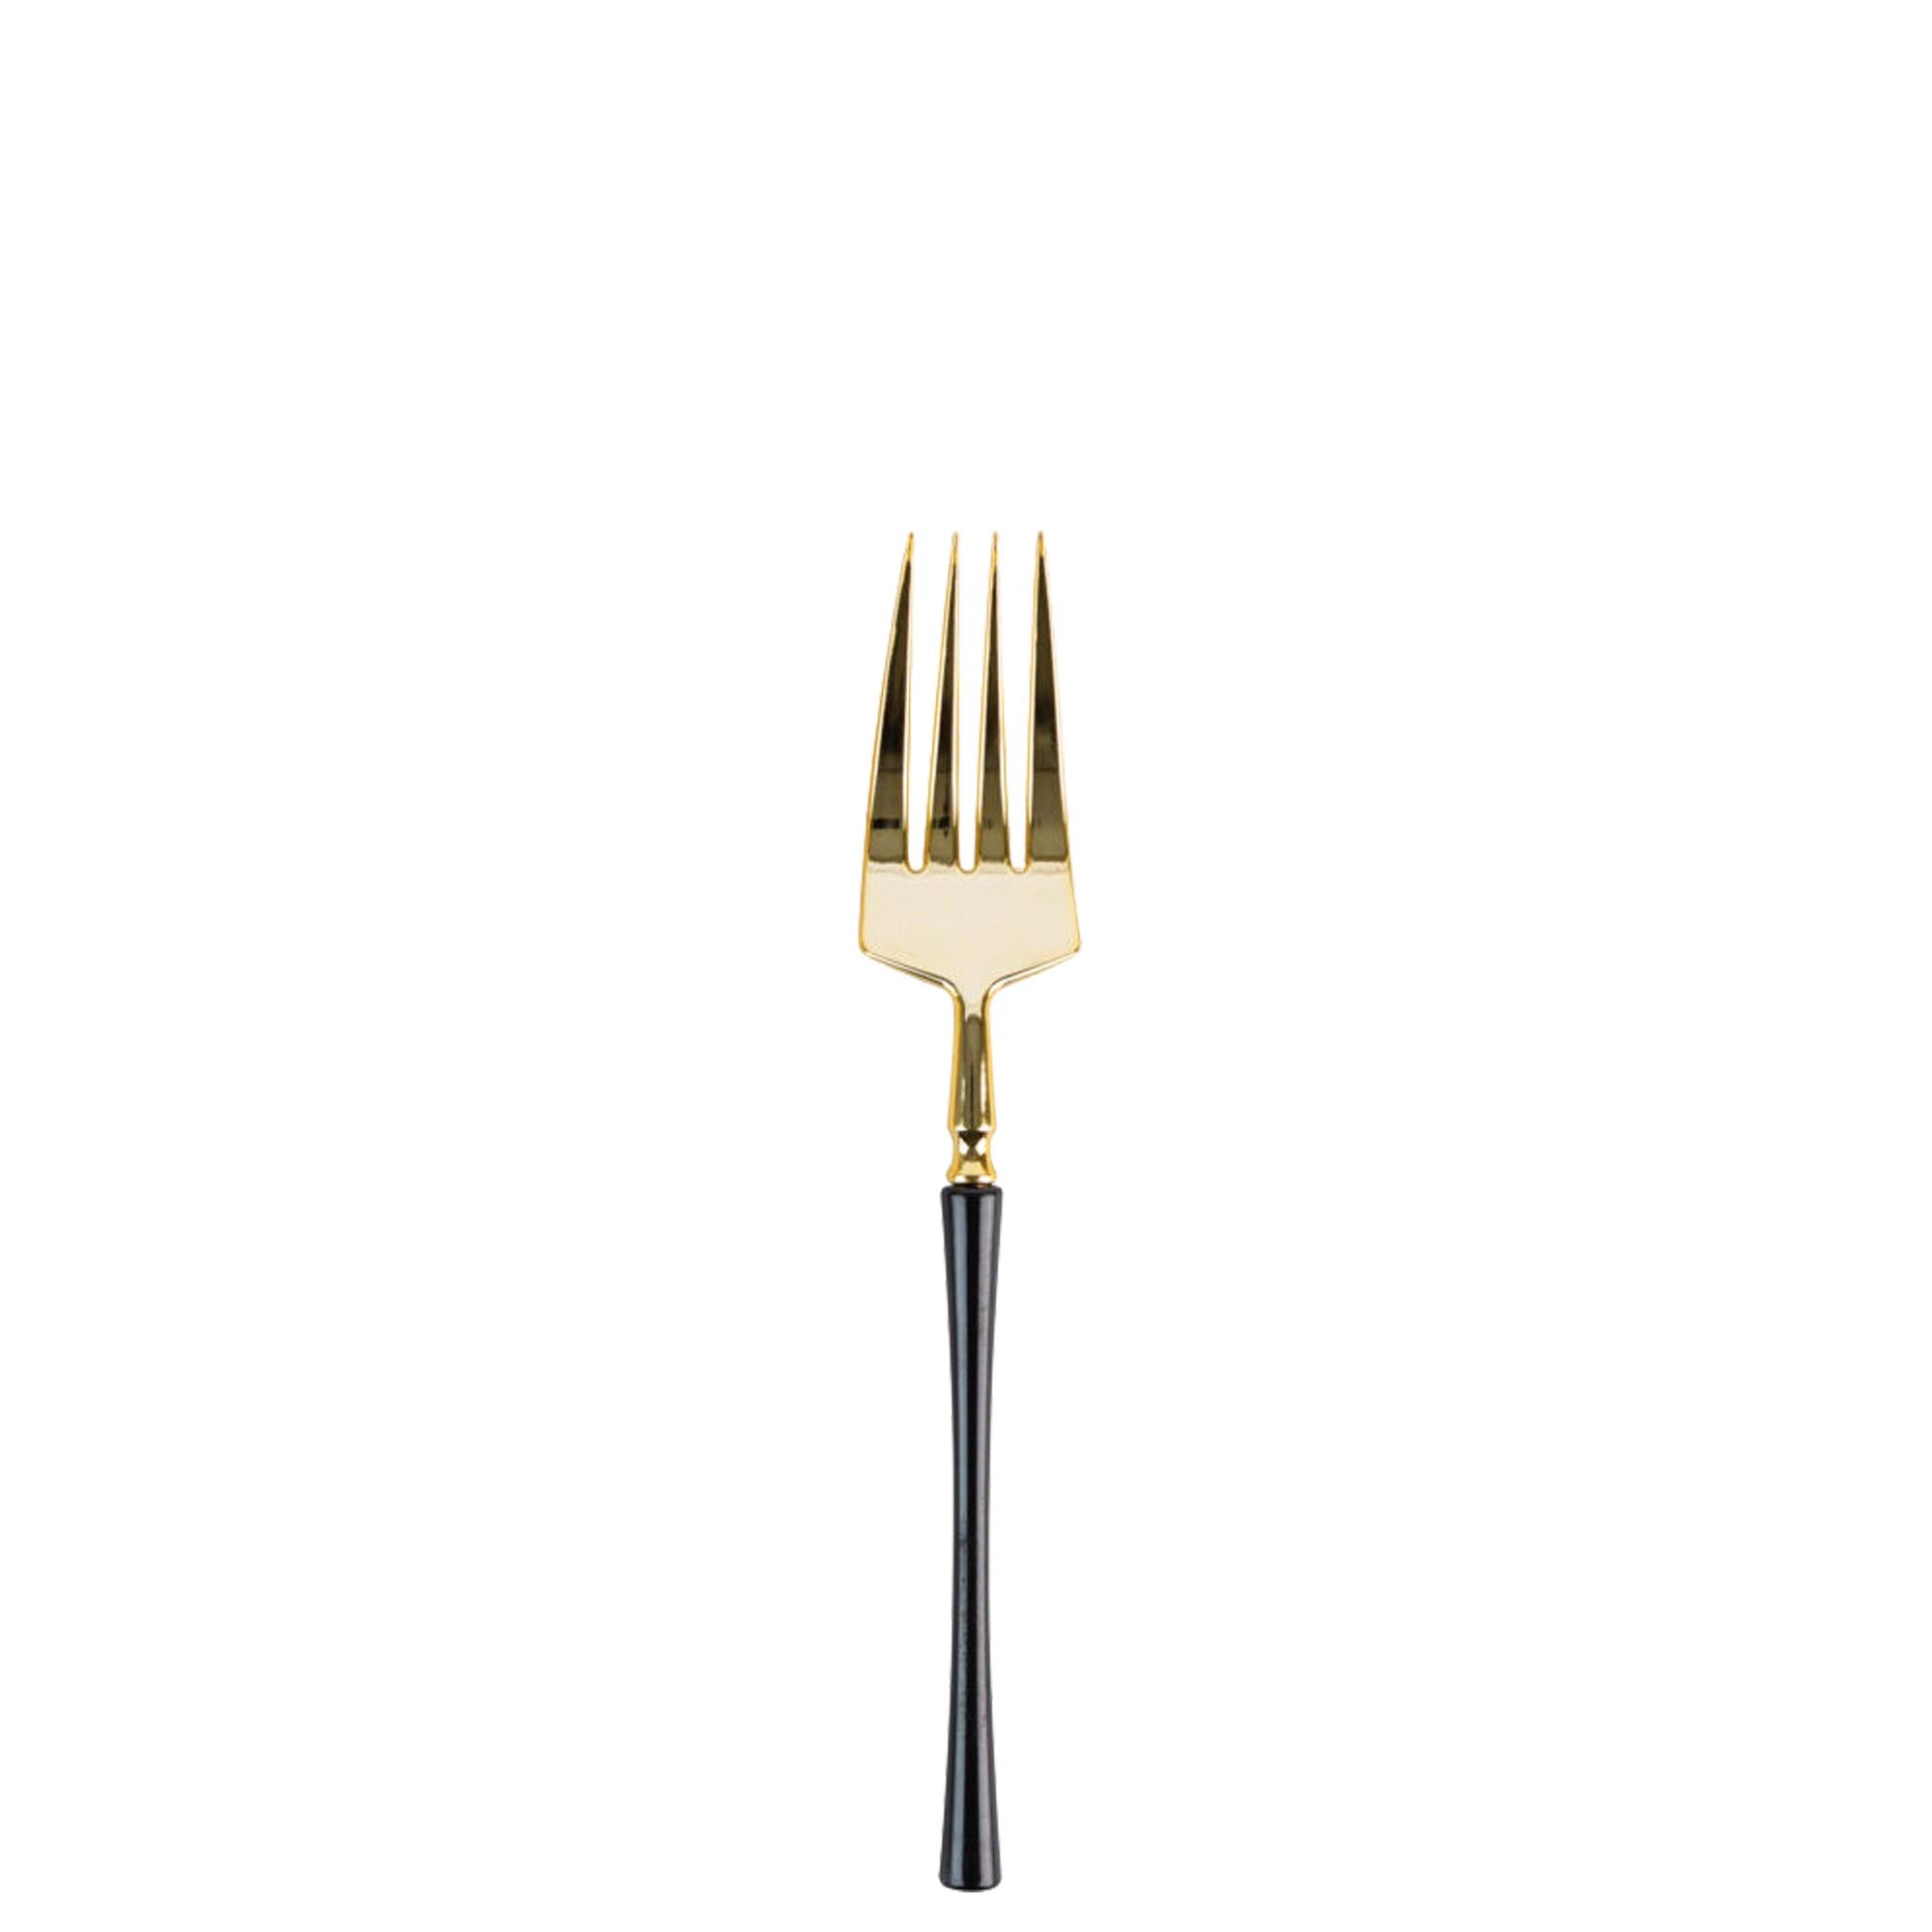 Plastic Salad Forks Black and Gold Infinity Flatware Collection